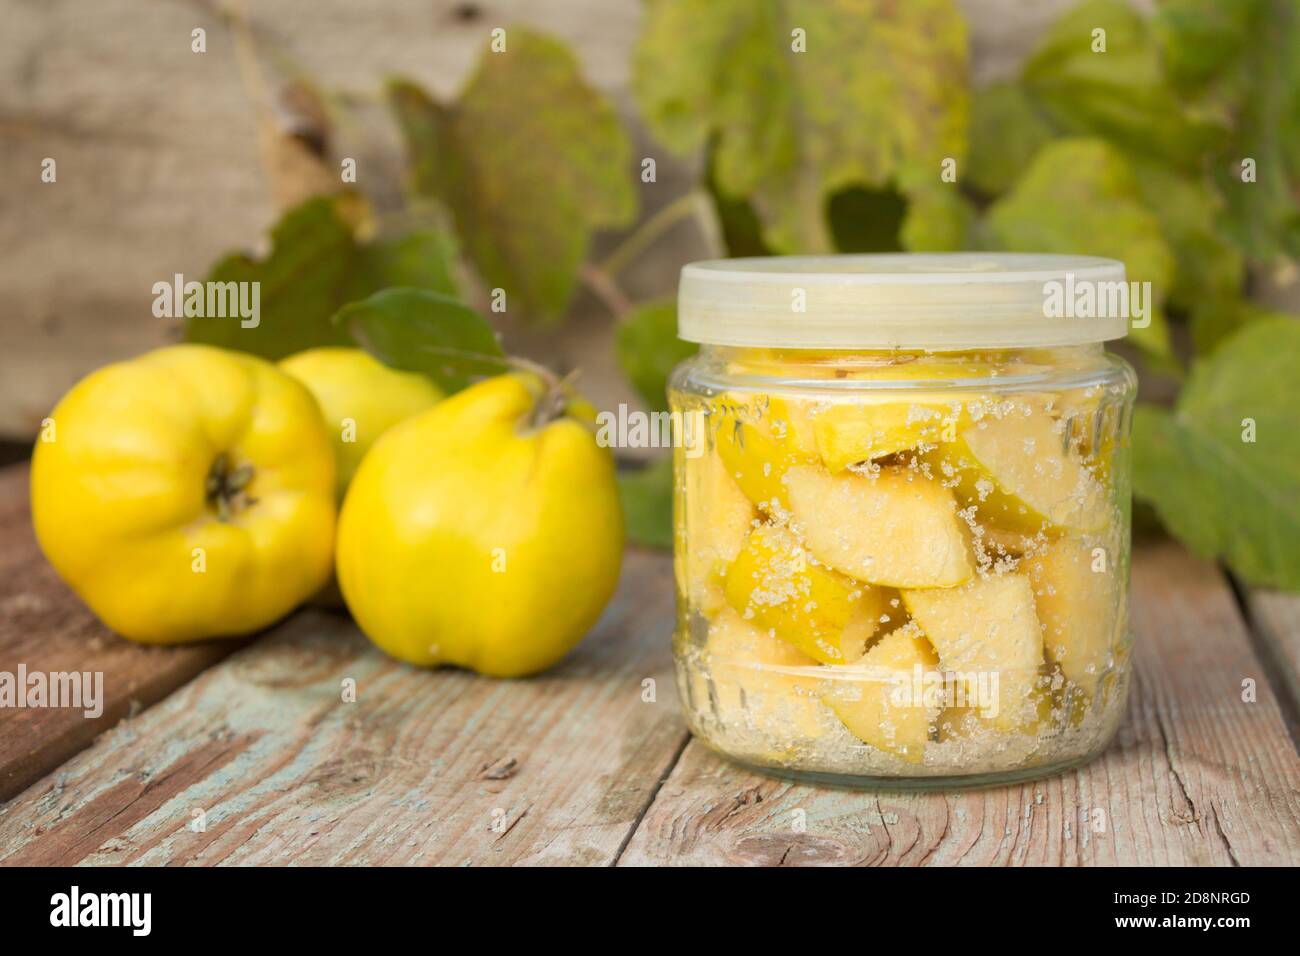 Quince, glass jar with candied quince on wooden background Stock Photo